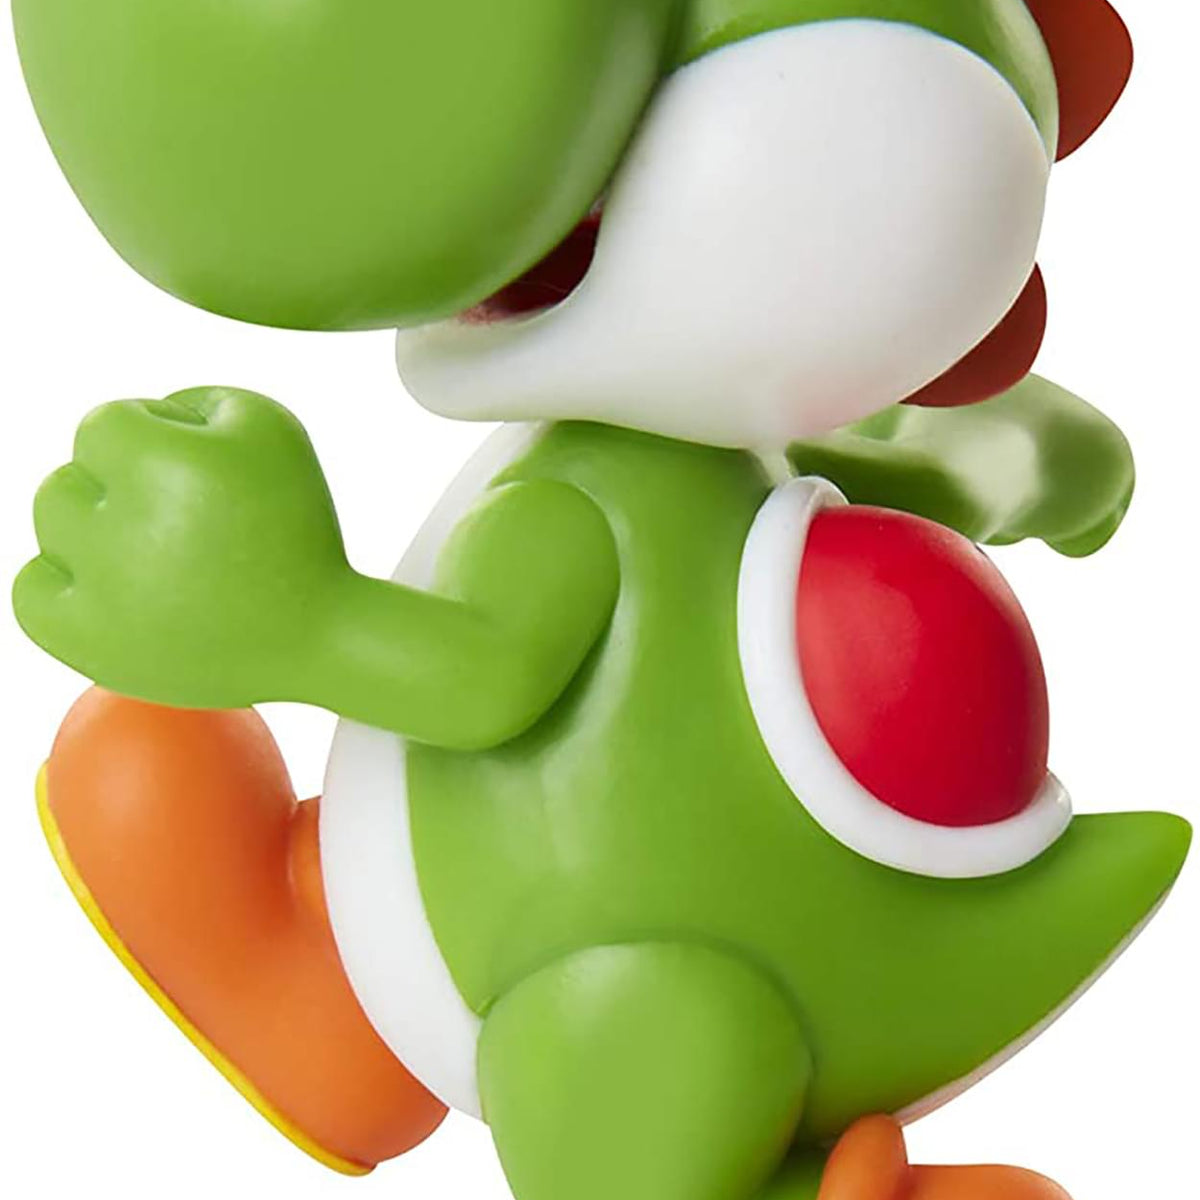  SUPER MARIO Action Figure 2.5 Inch Running Yoshi Collectible  Toy : Toys & Games